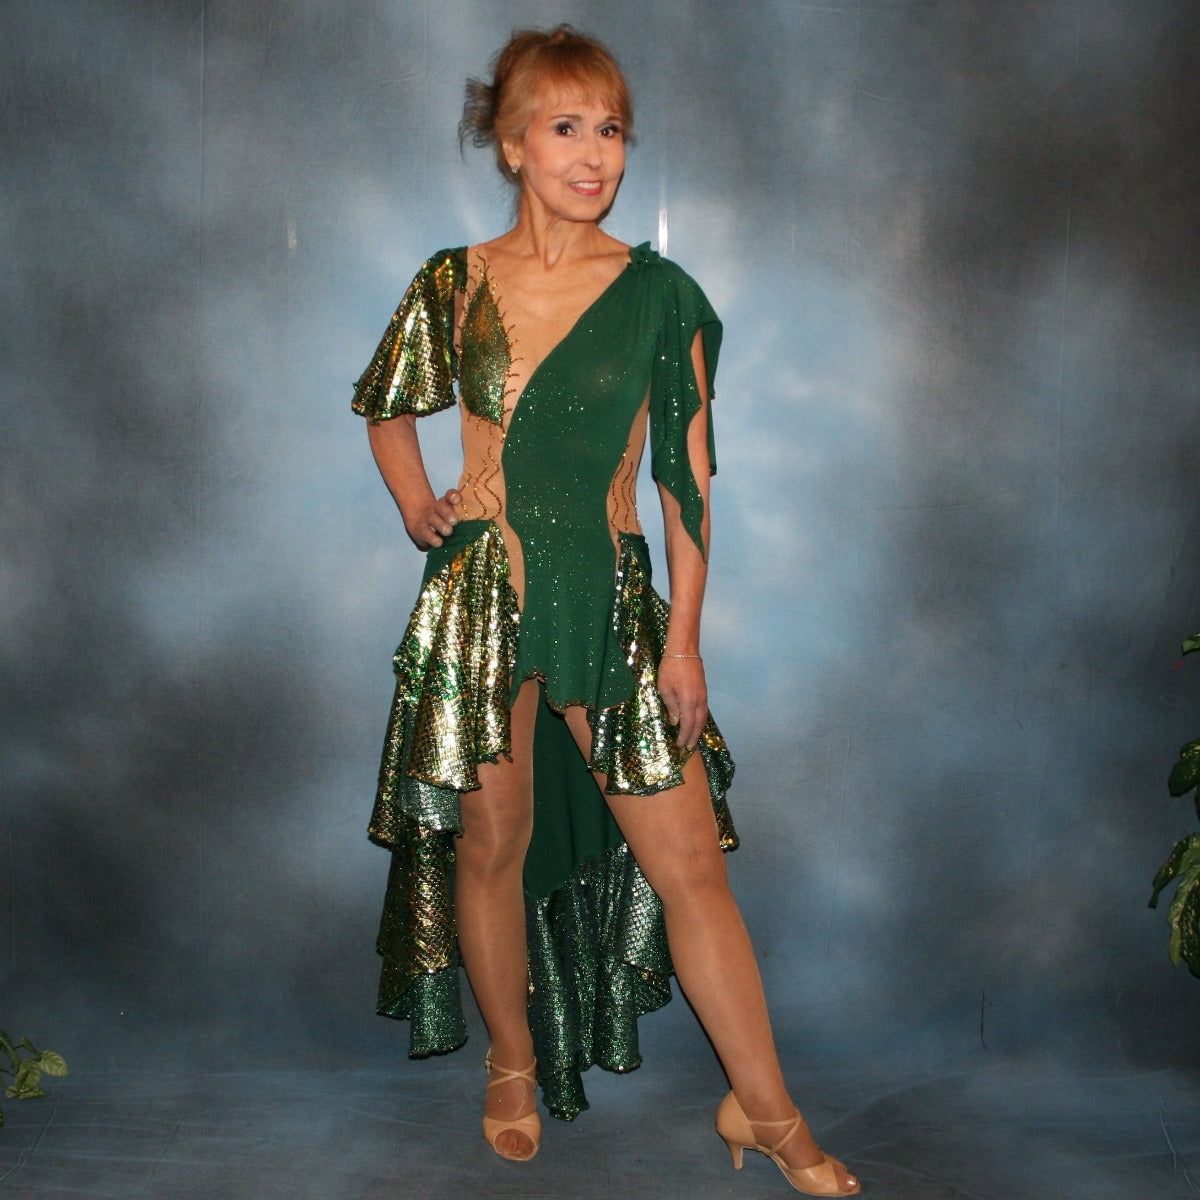 Crystal's Creations Green Latin/rhythm dress was created on a nude illusion base of deep emerald green glitter slinky fabric along with flounces & accents of rich emerald green & gold tropical print sequin fabric, embellished with gold aurum Swarovski stonework plus hand beaded detailing.